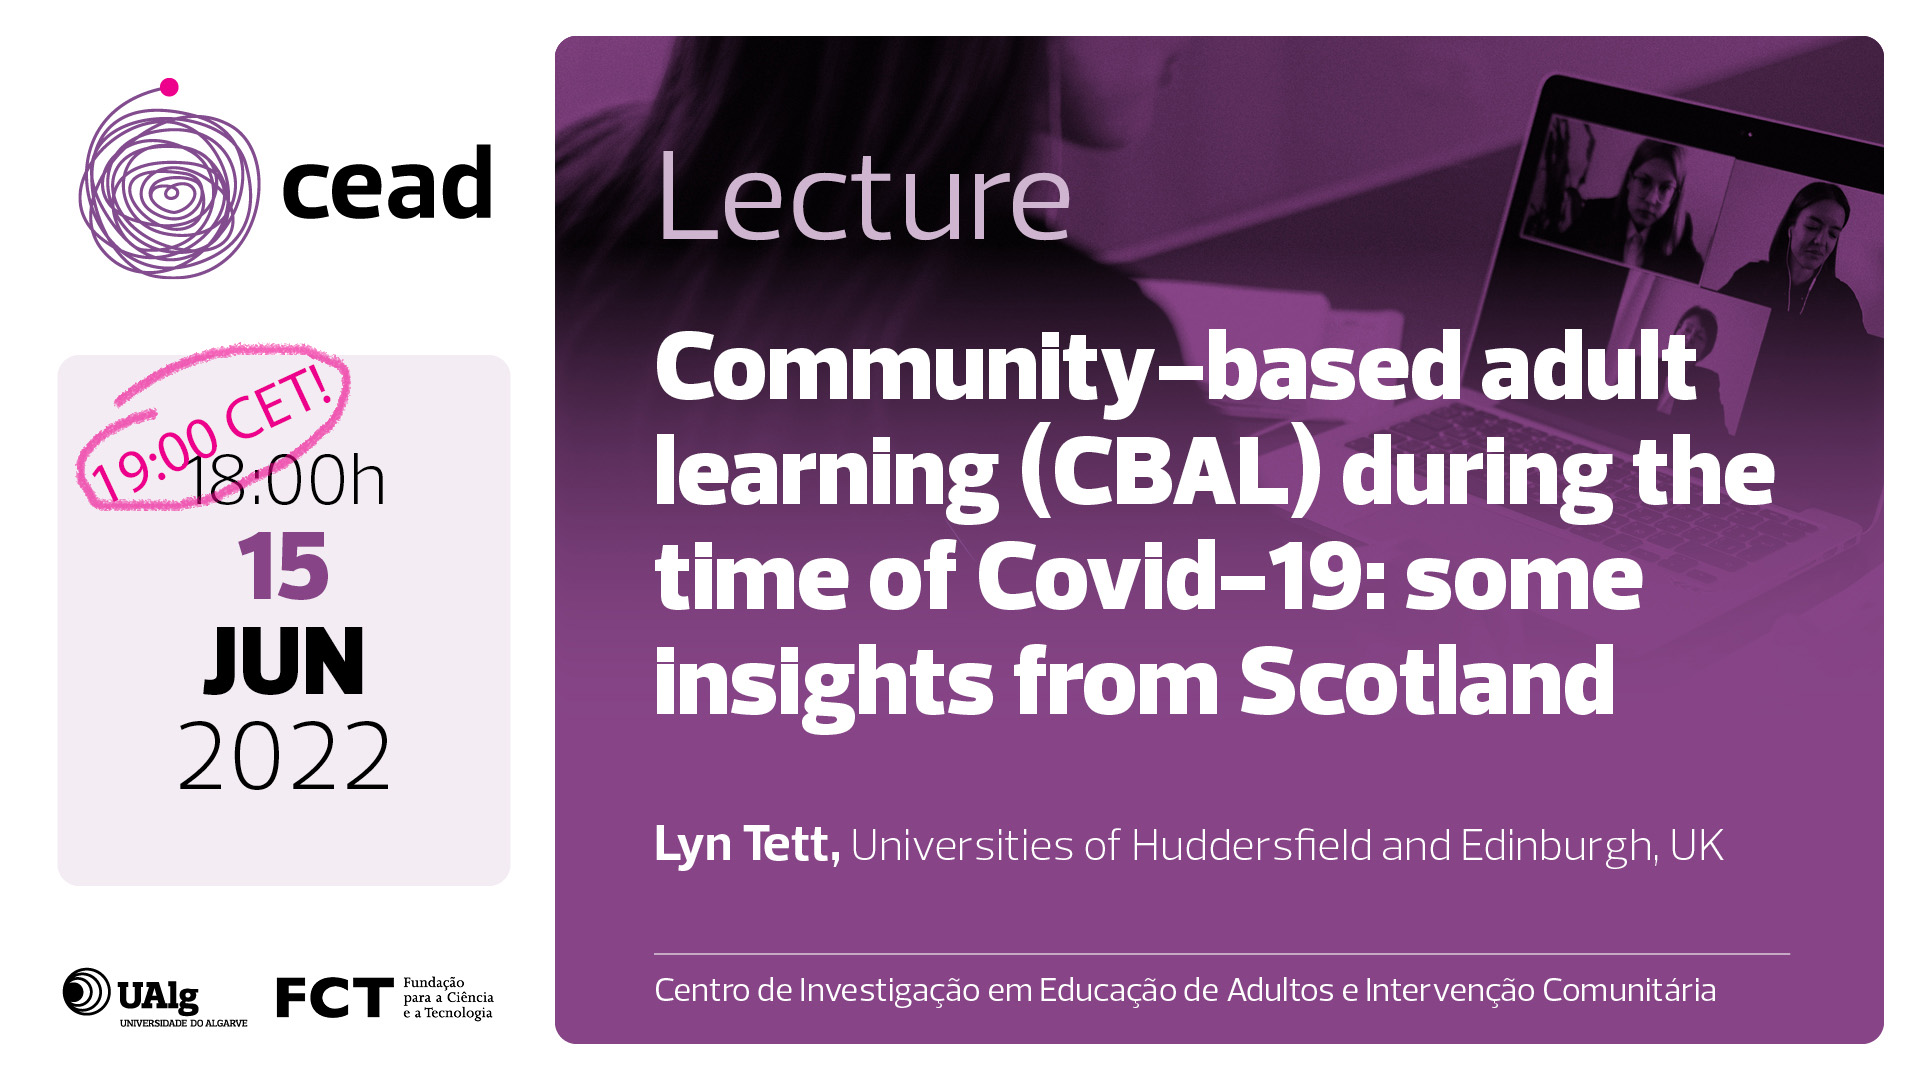 Community-based adult learning (CBAL) during the time of Covid-19: some insights from Scotland. 15 juni kl 19. 